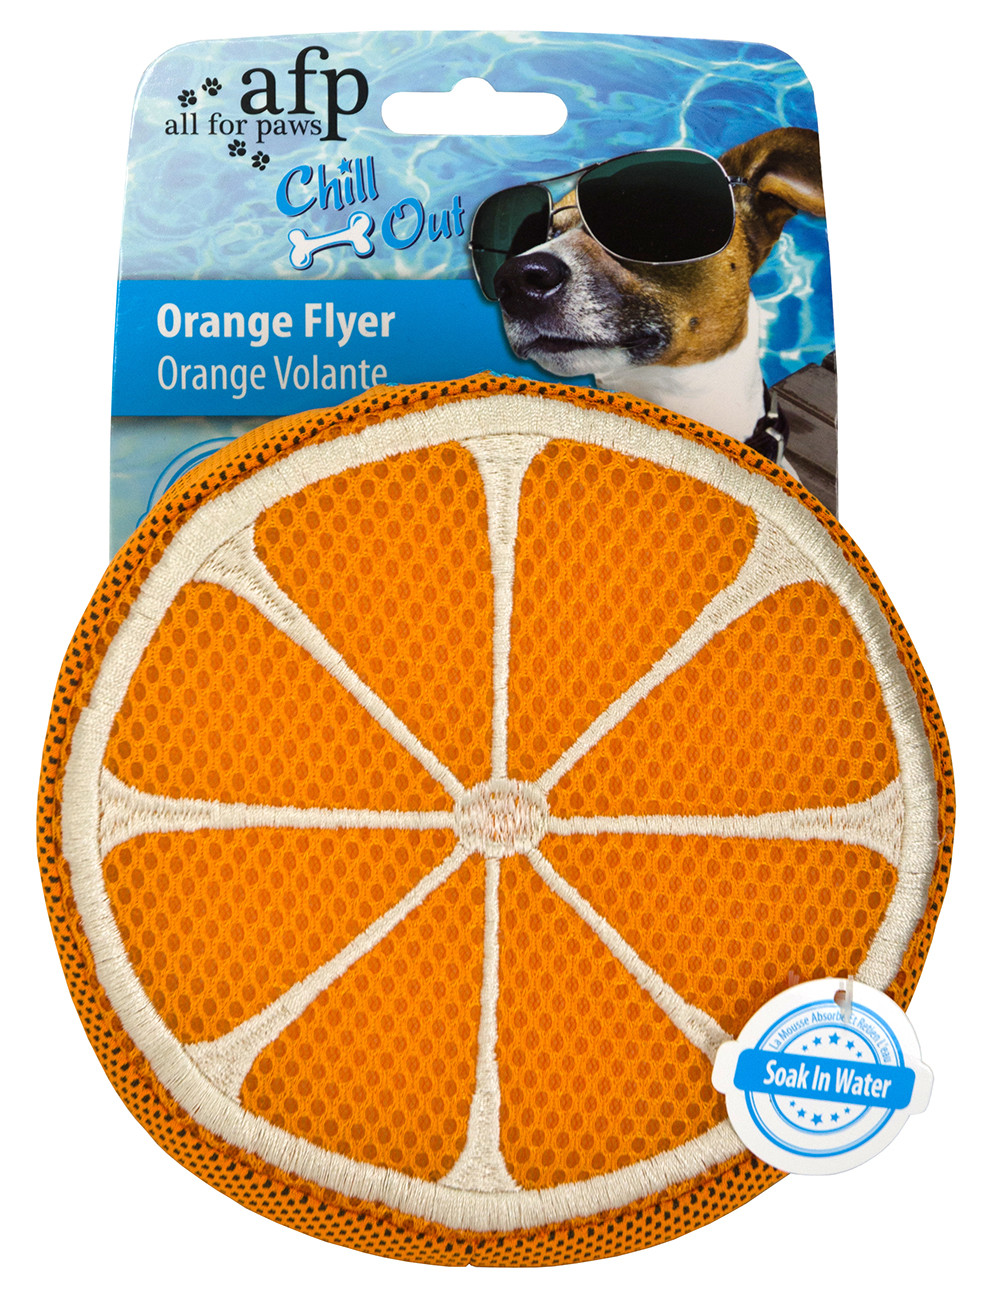 All for Paws Chill Out Orange Flyer